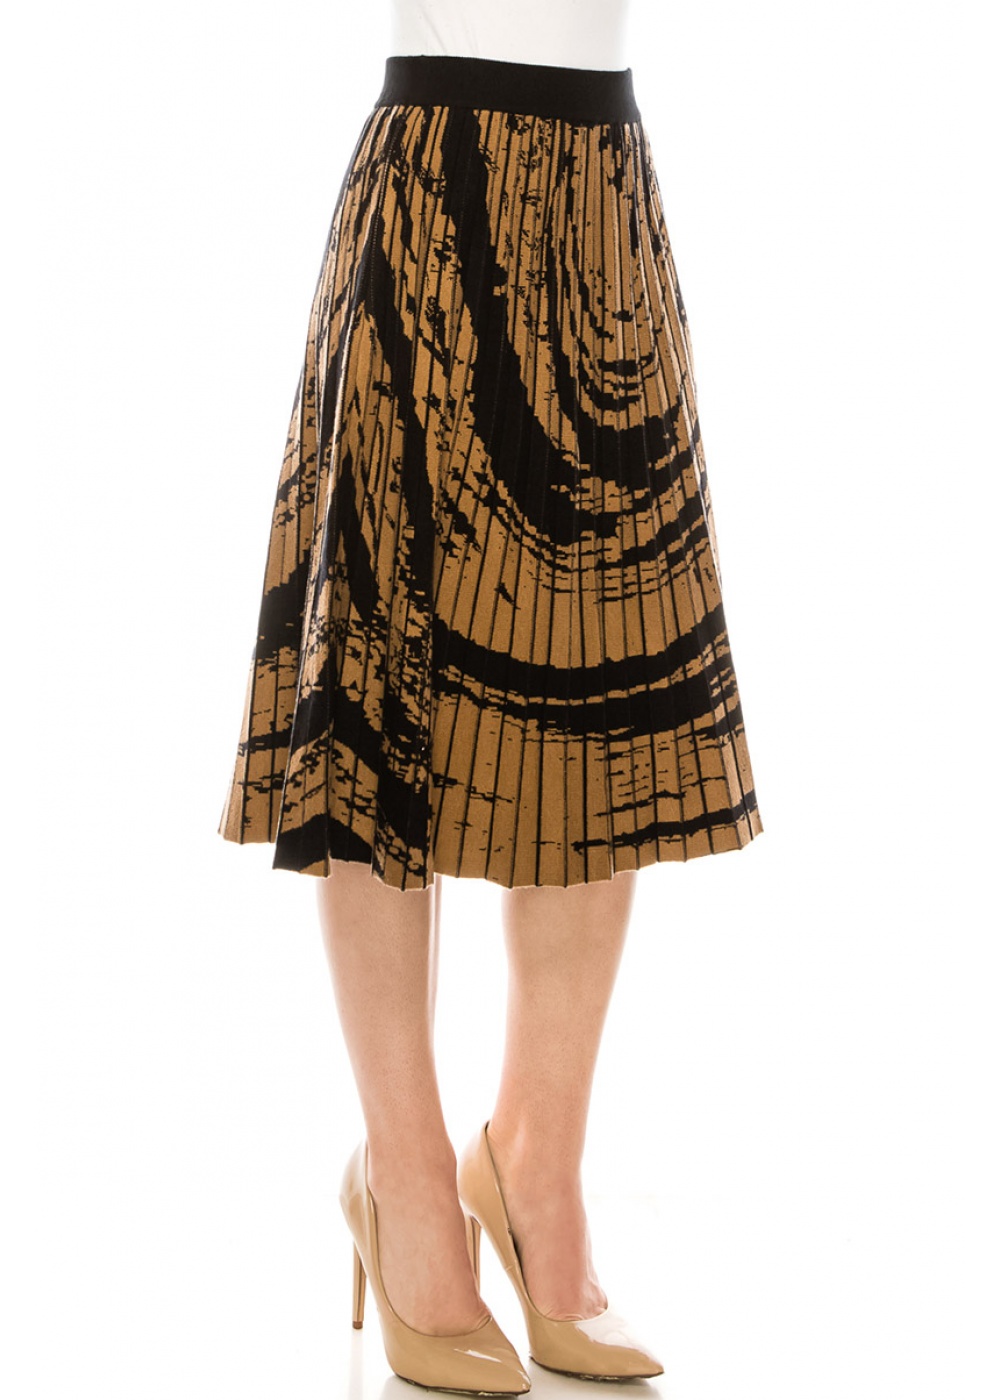 Abstract Pattern Pleated Skirt in Camel